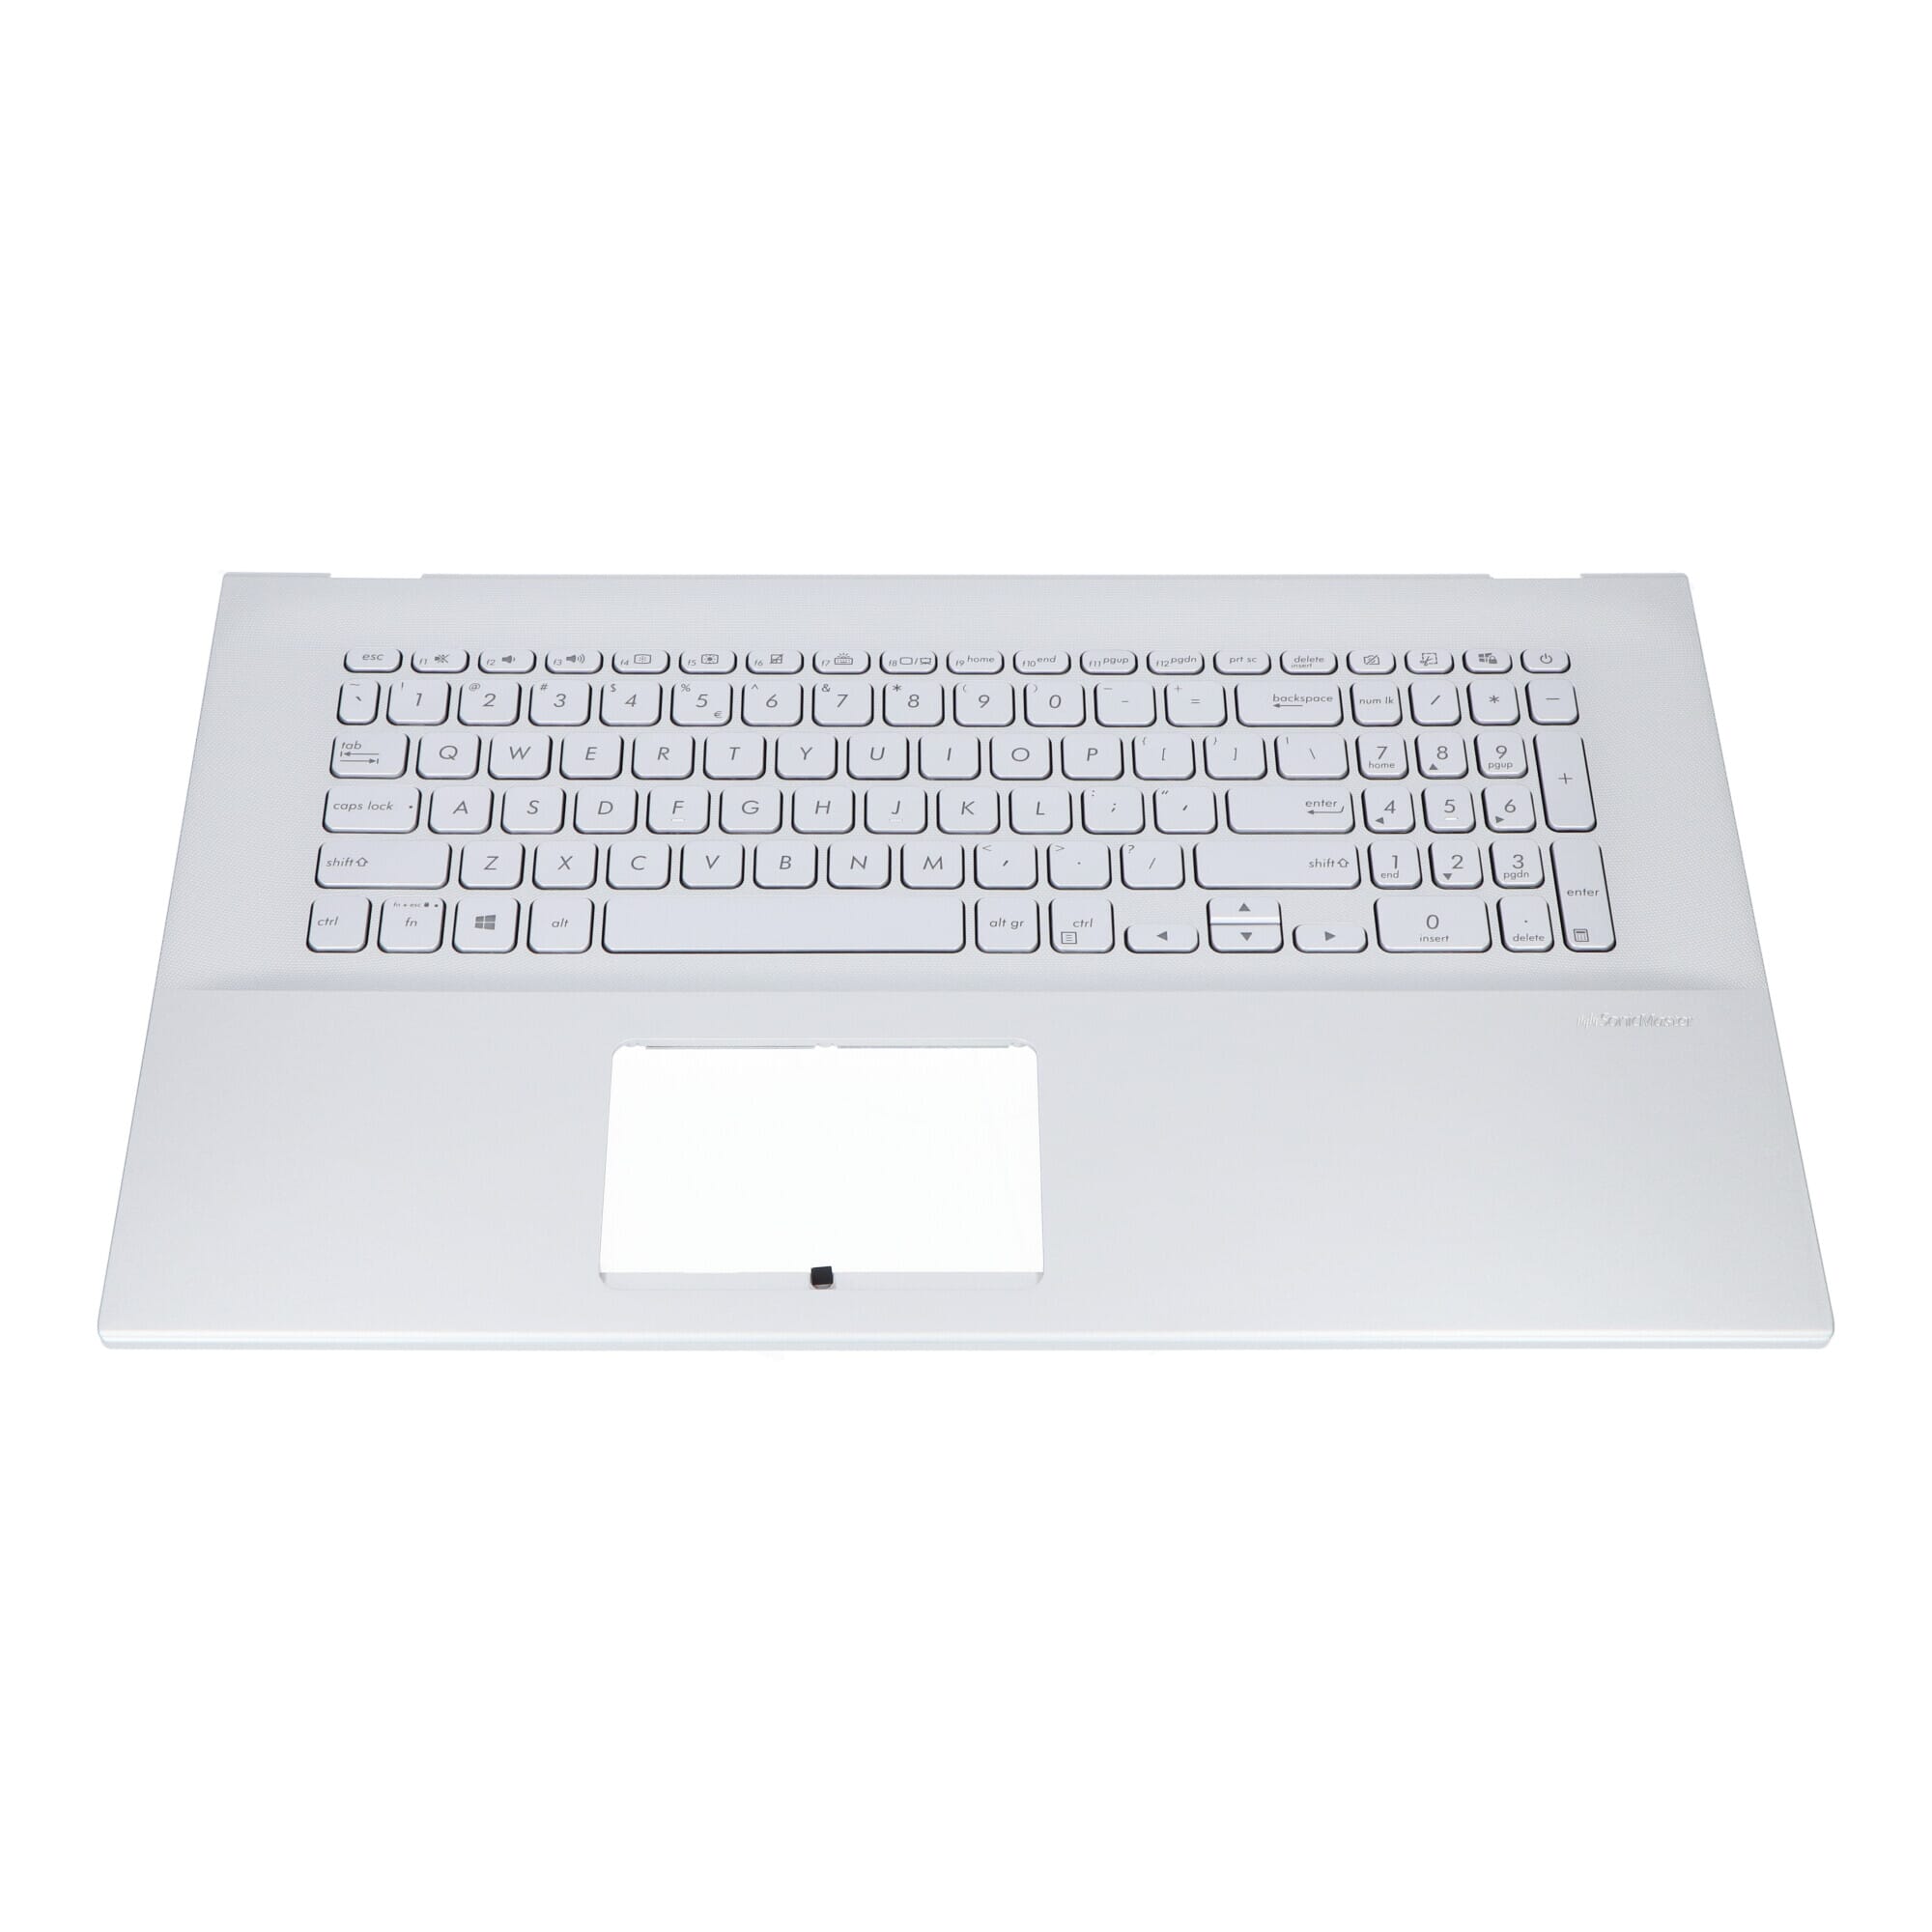 Asus Laptop Qwerty + Top Cover, Backlit - ReplaceDirect.be